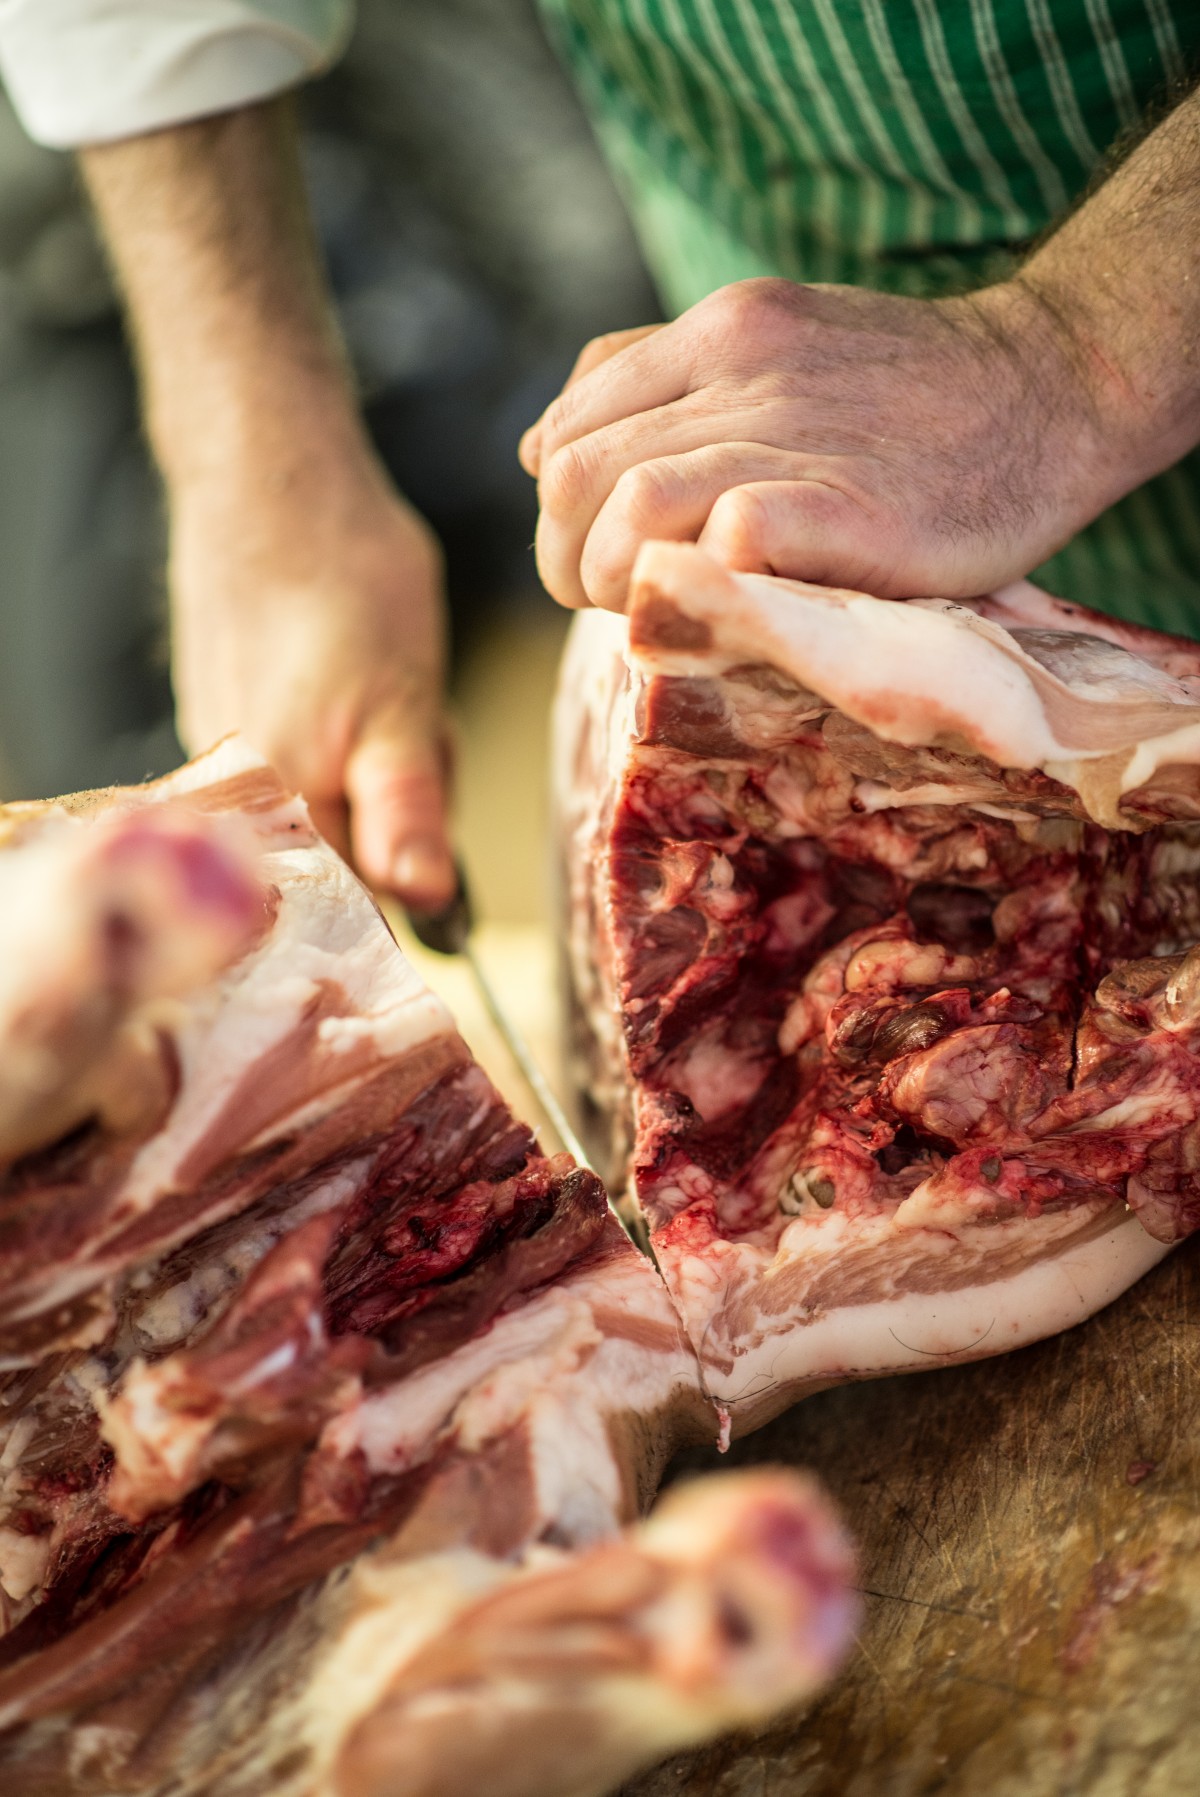 Enjoy a tour of the beautiful Newmiln farm tour and best of beef and butchery at Hugh Grierson Organics on the 17th September. You will also get a delicious lunch. Get booked so you don't miss out!